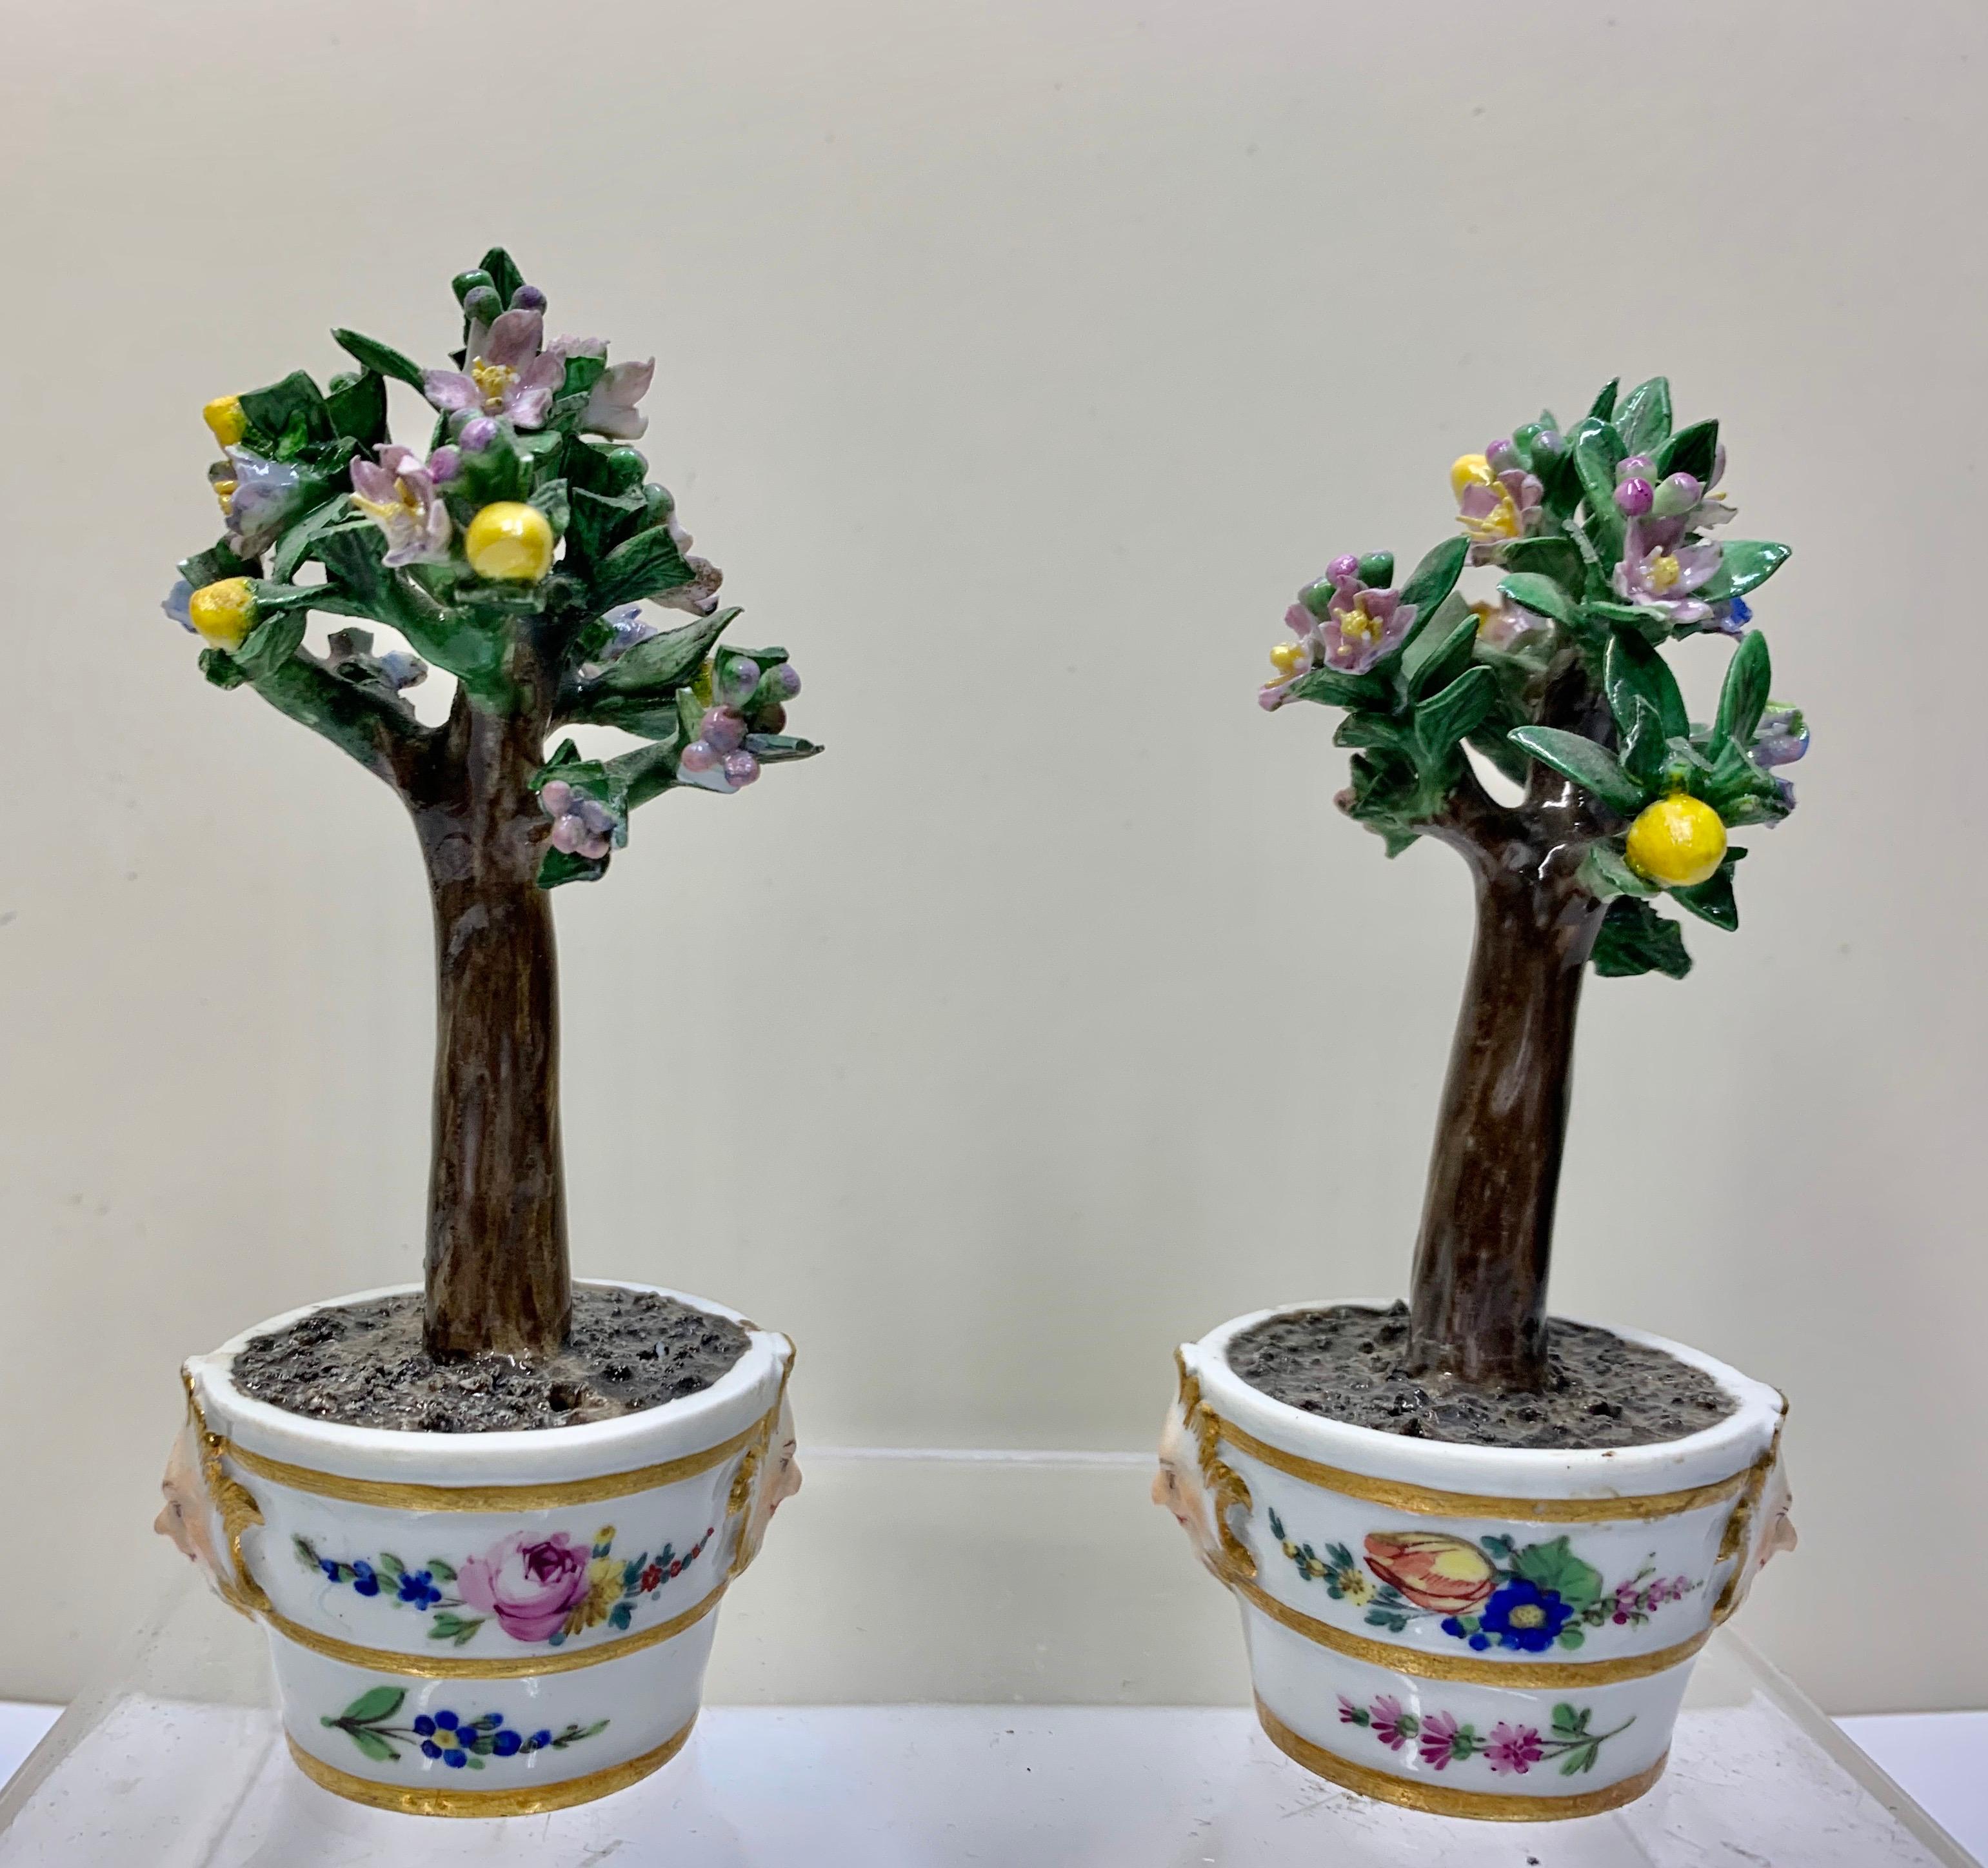 A Superb matching pair of Meissen Marcolini Lemon Trees in Tubs Circa 1790.
Fine quality Meissen porcelain models of flowerpots, modelled as cylindrical tubs enhanced in gilt with 2 mythological maskson sides of each one, these are made in the